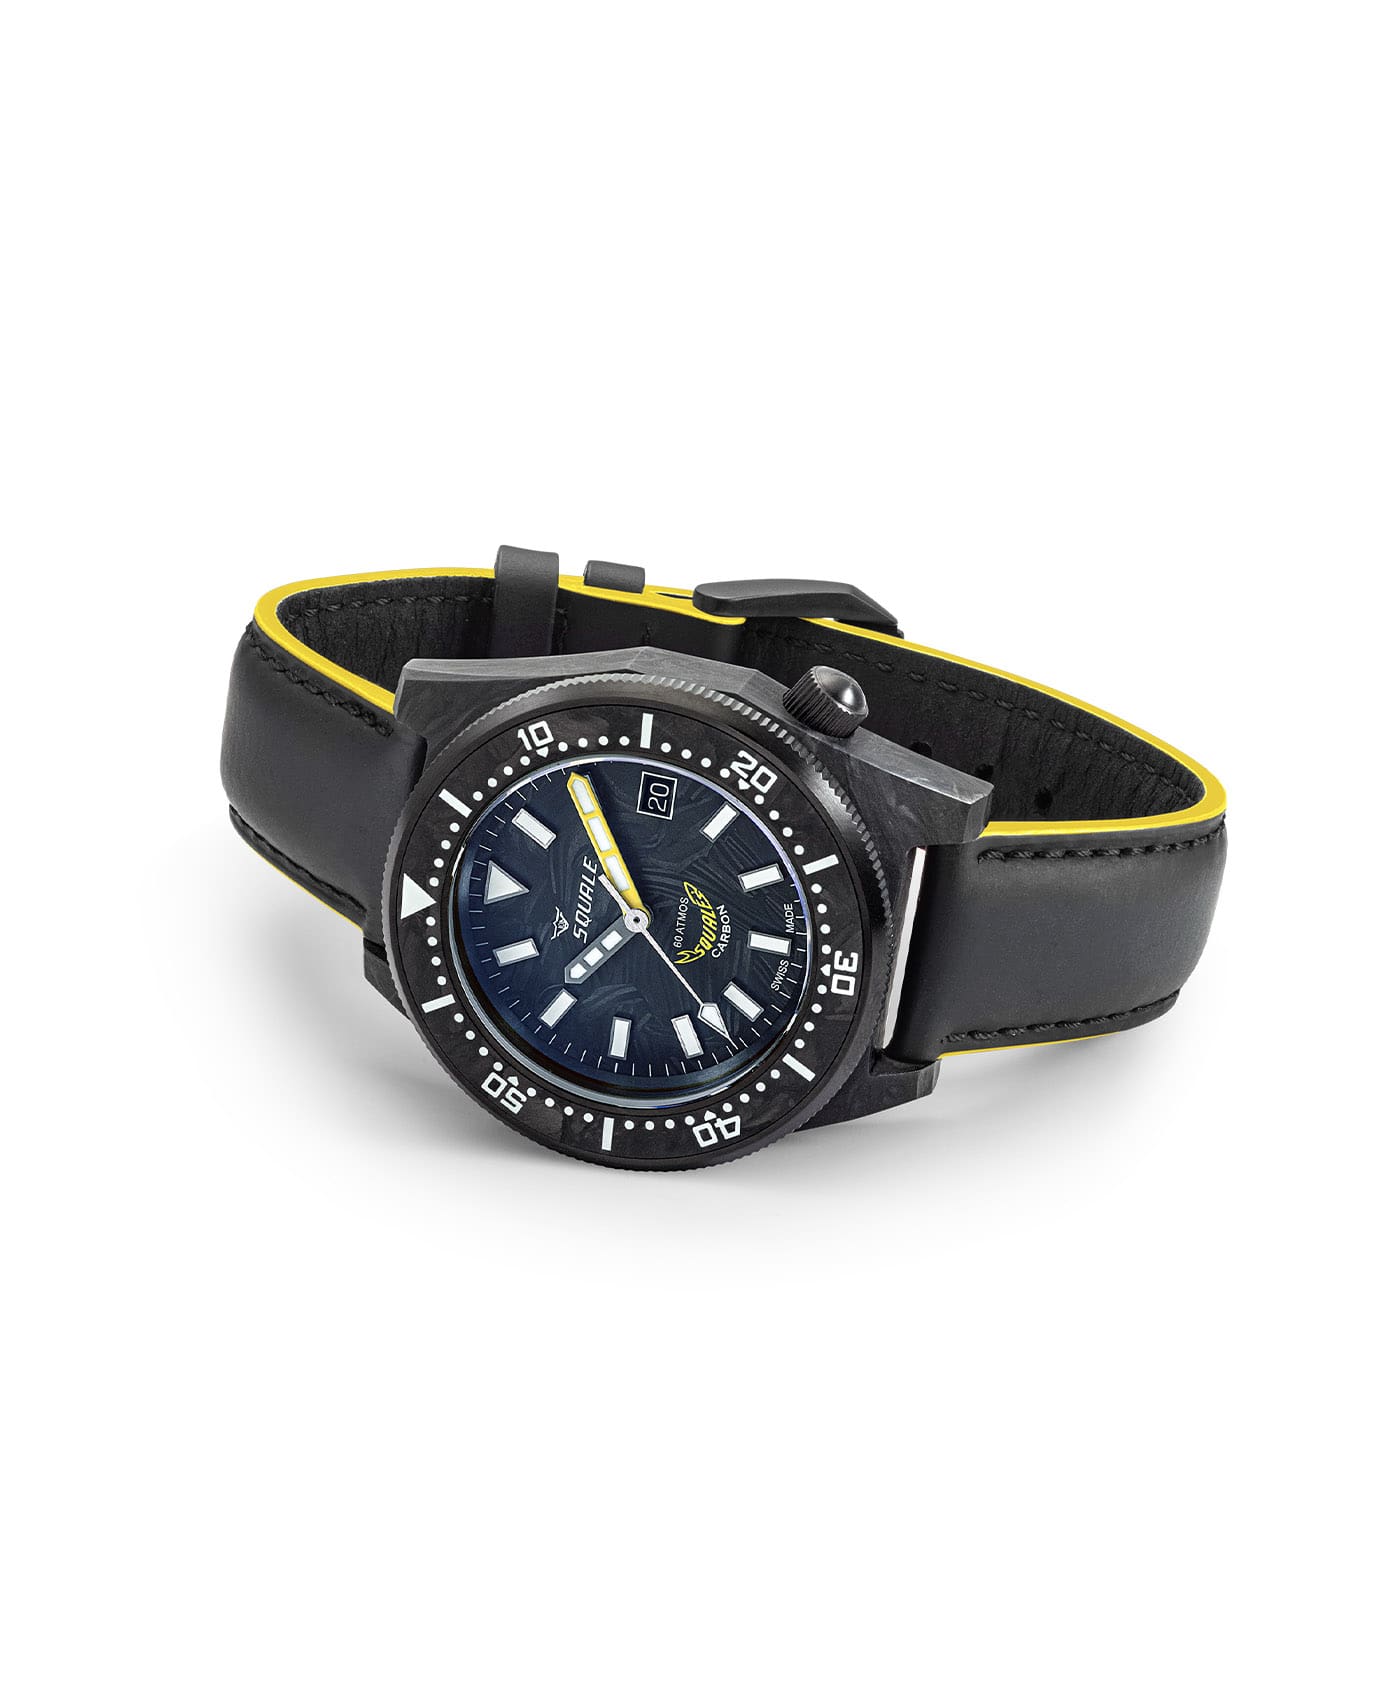 Squale - 60 ATM - T-183 Forged Carbon - Yellow1-min